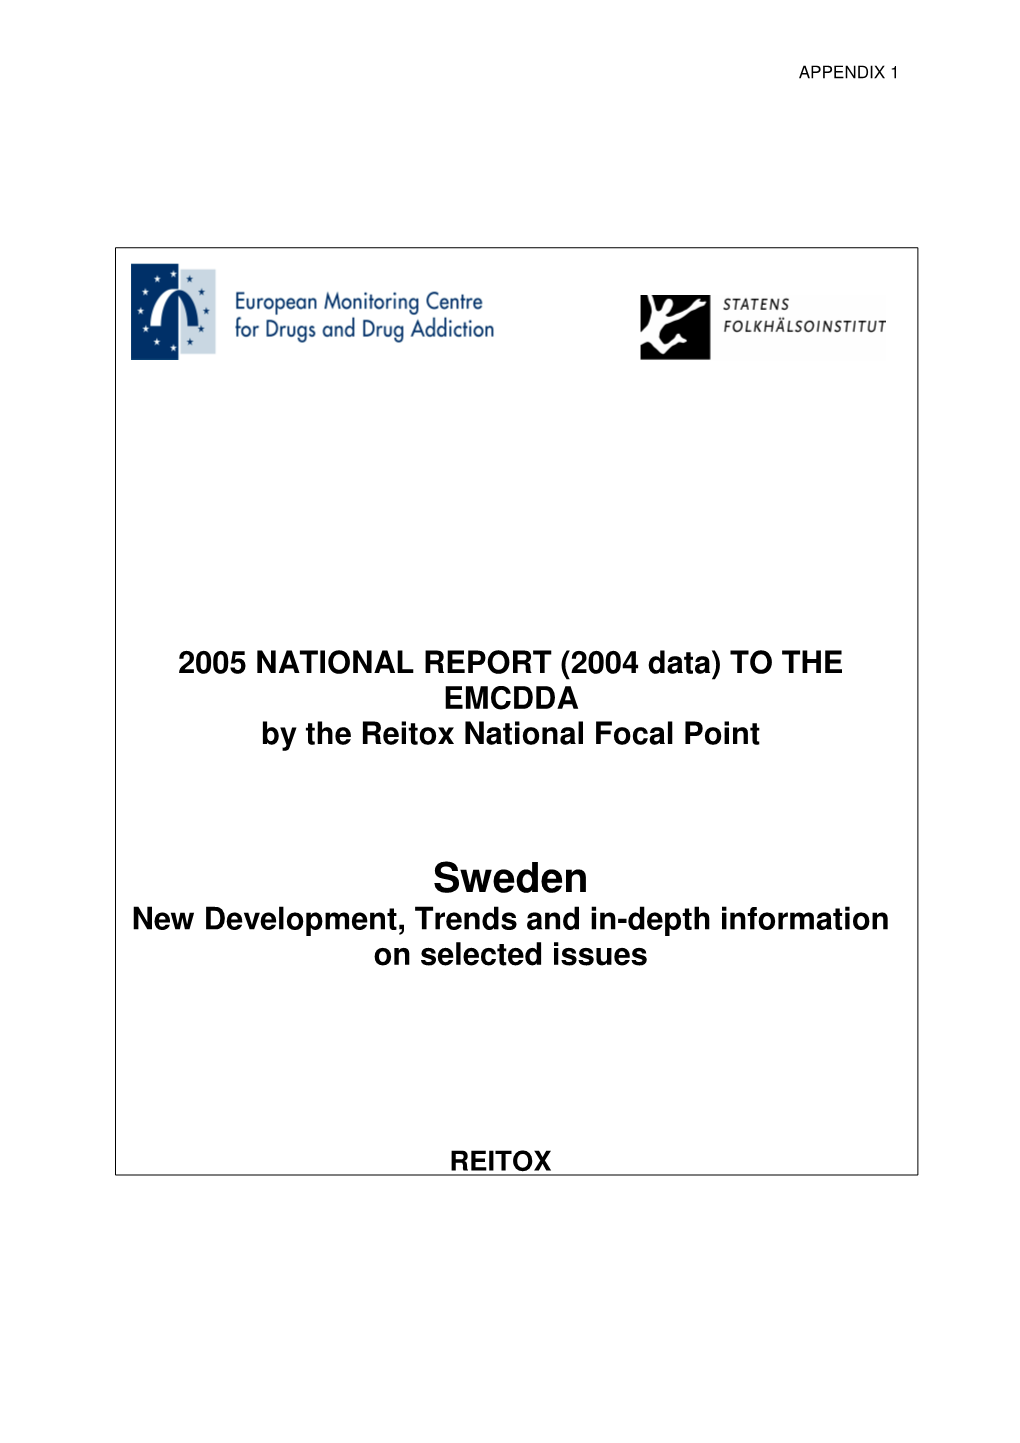 Sweden New Development, Trends and In-Depth Information on Selected Issues